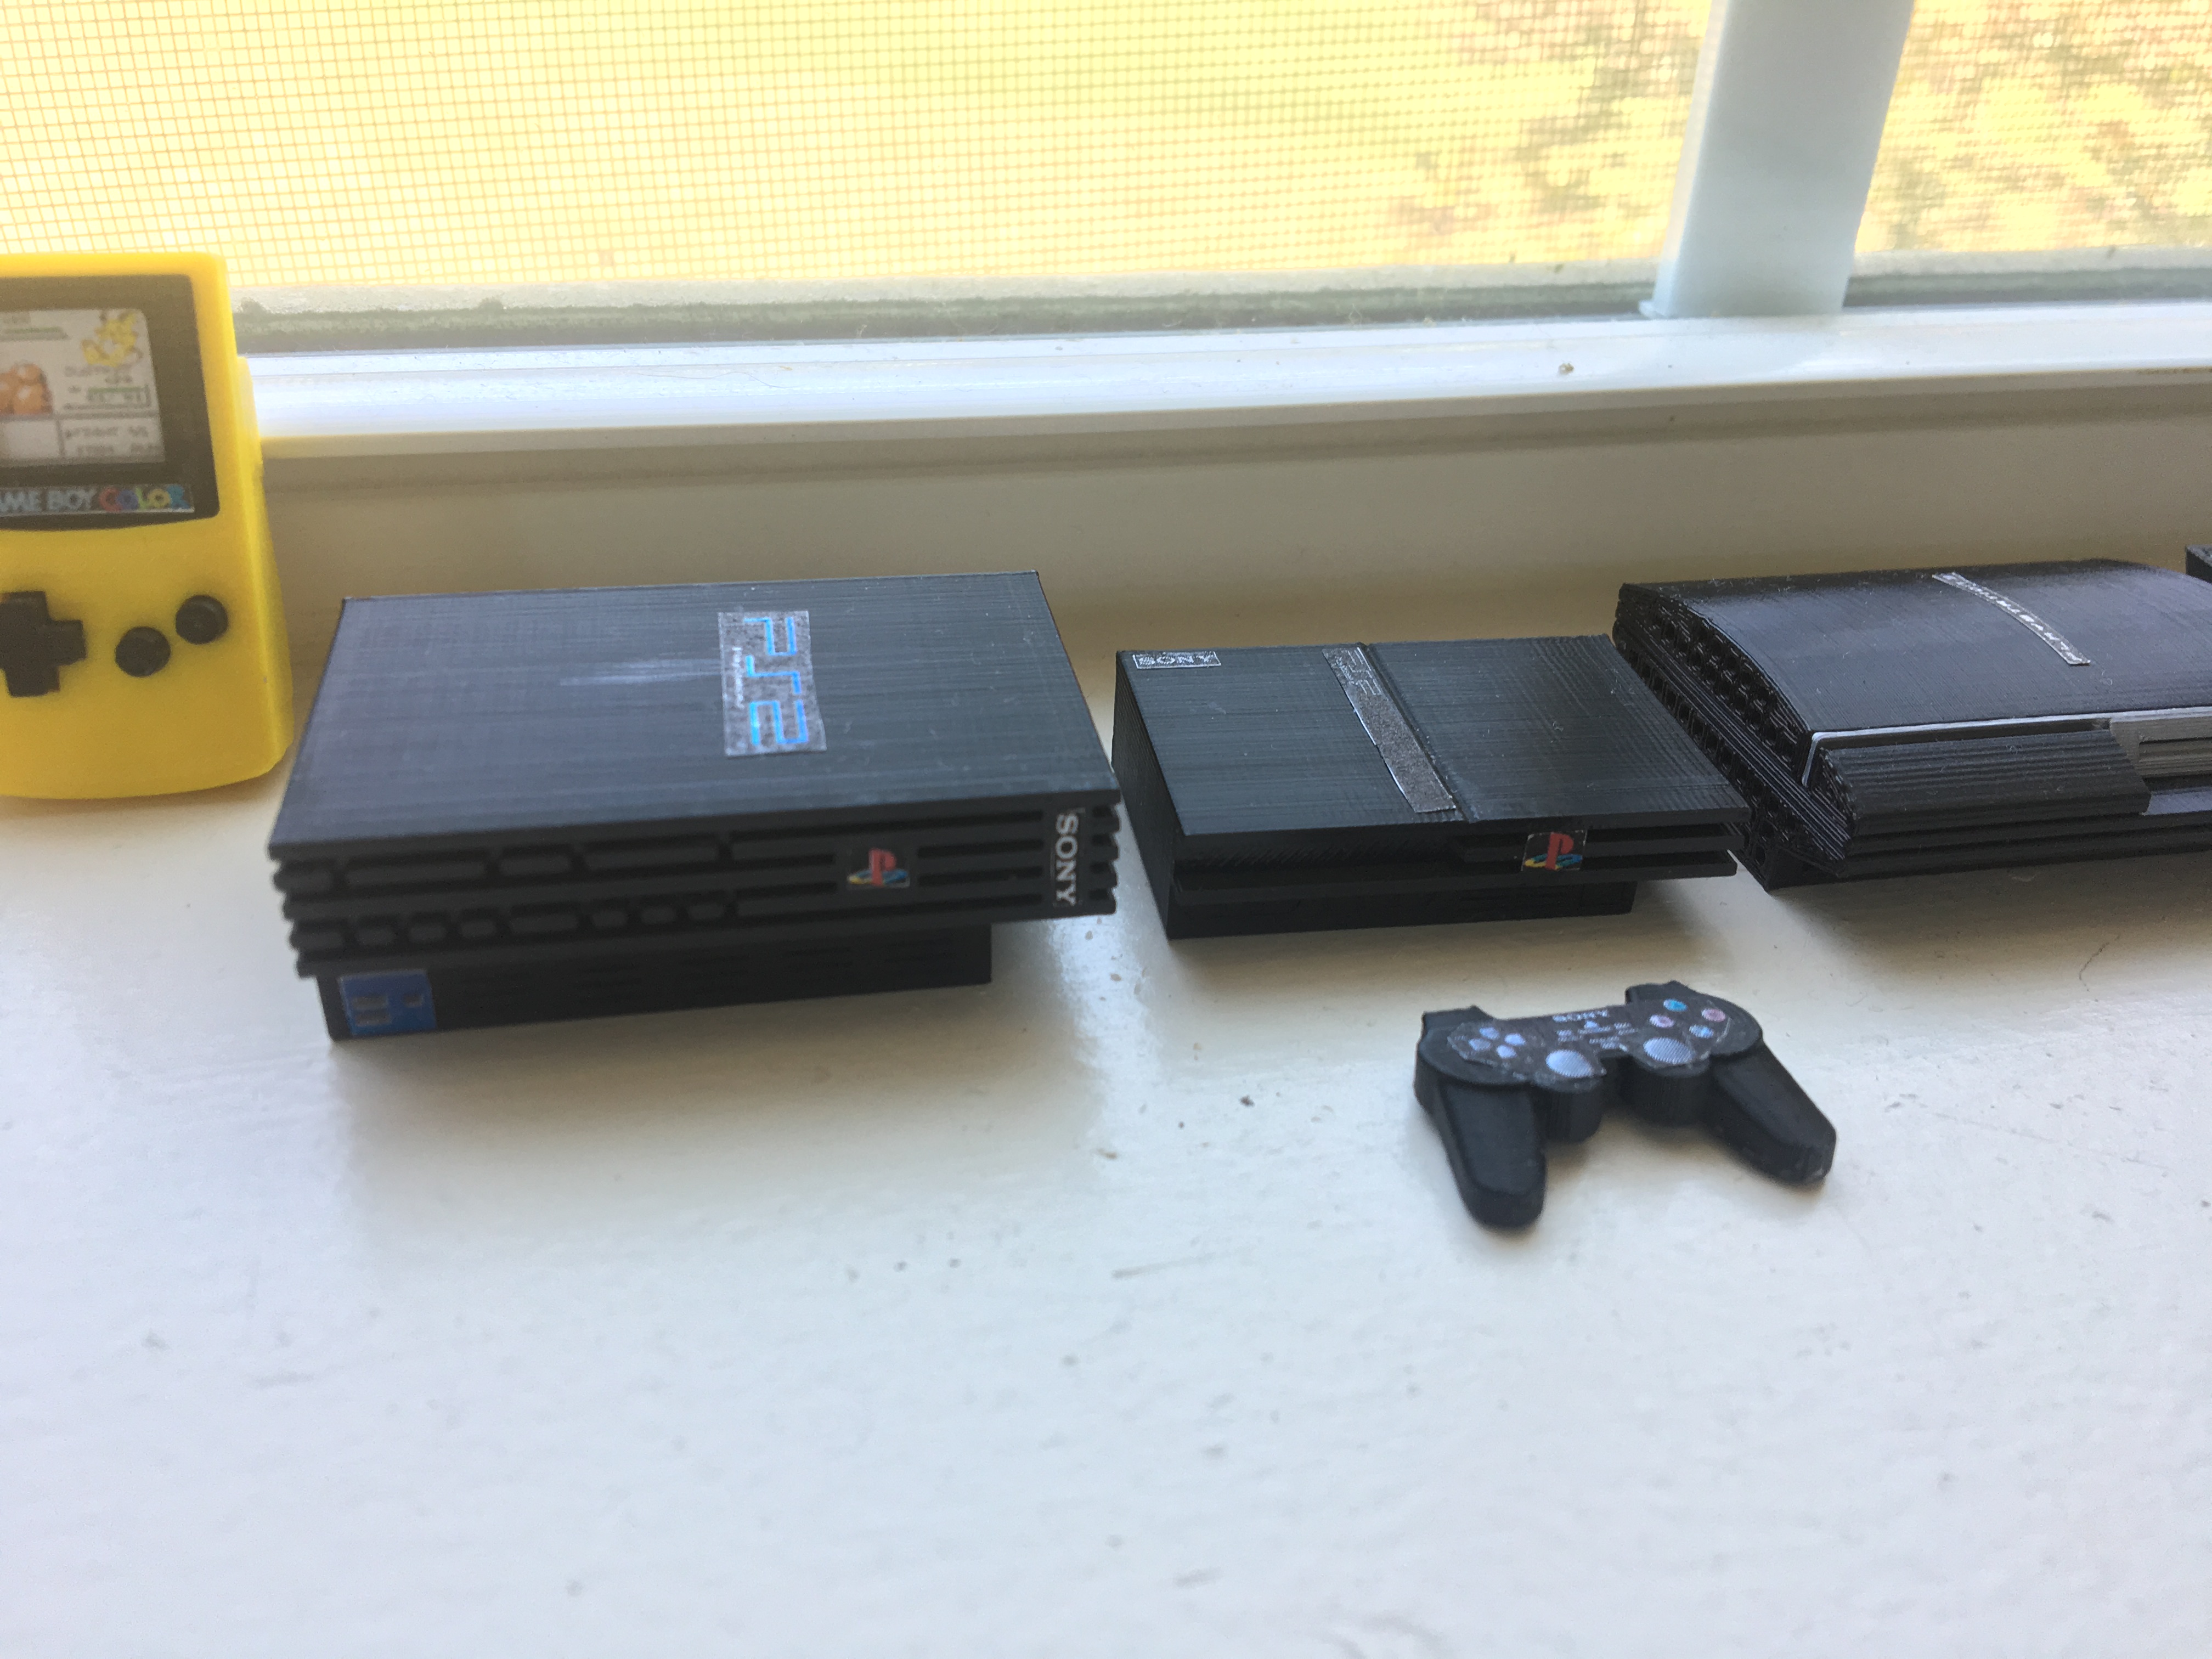 playstation 2 mini release date